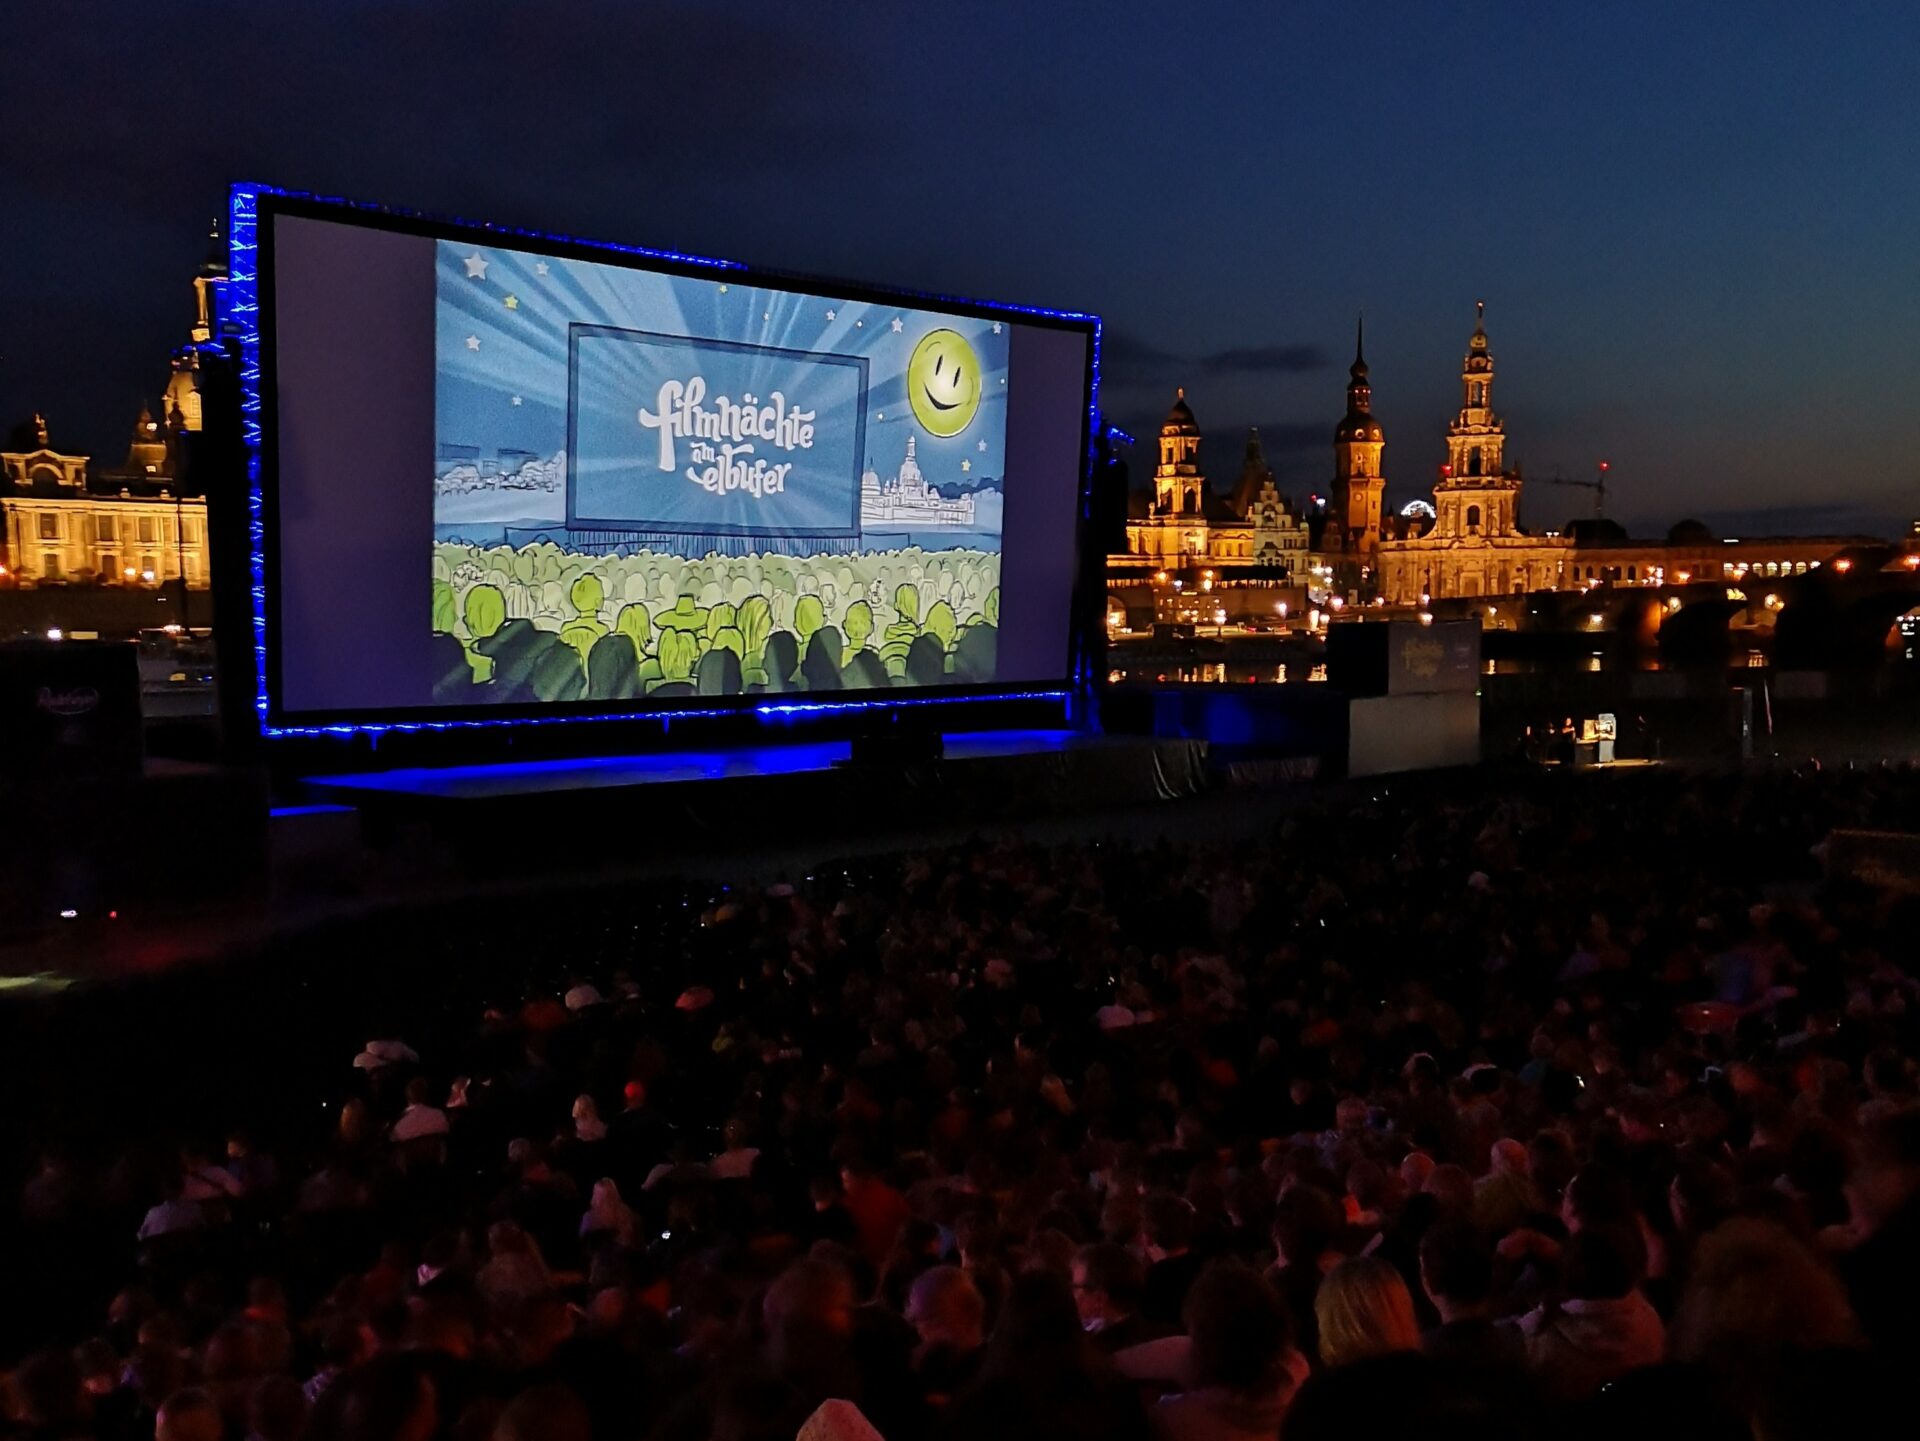 Open-Air-Kino mal anders: Coole Kinolocations in Deutschland